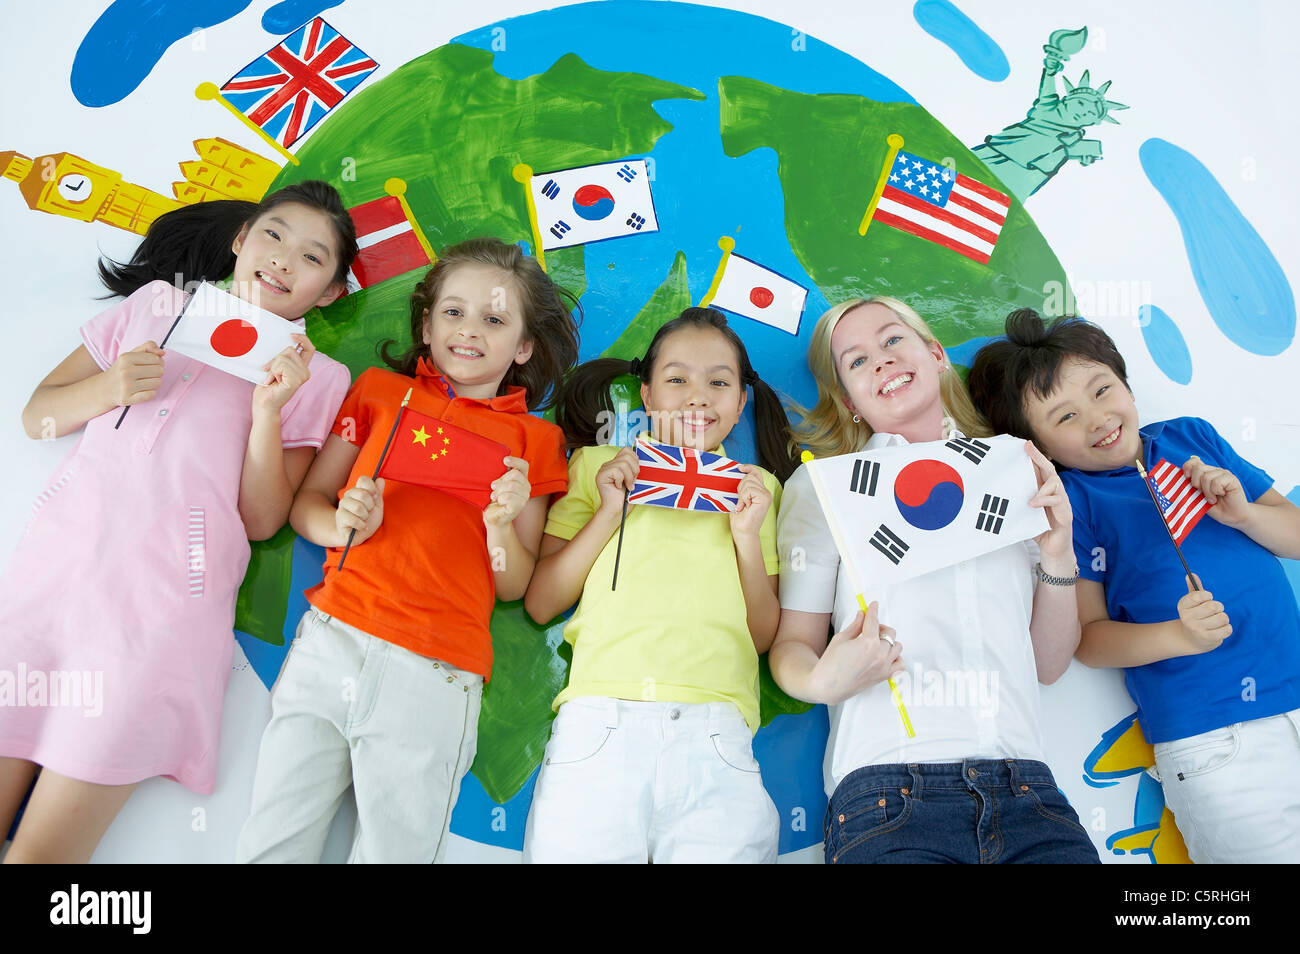 Students and a teacher lying down holding flags Stock Photo